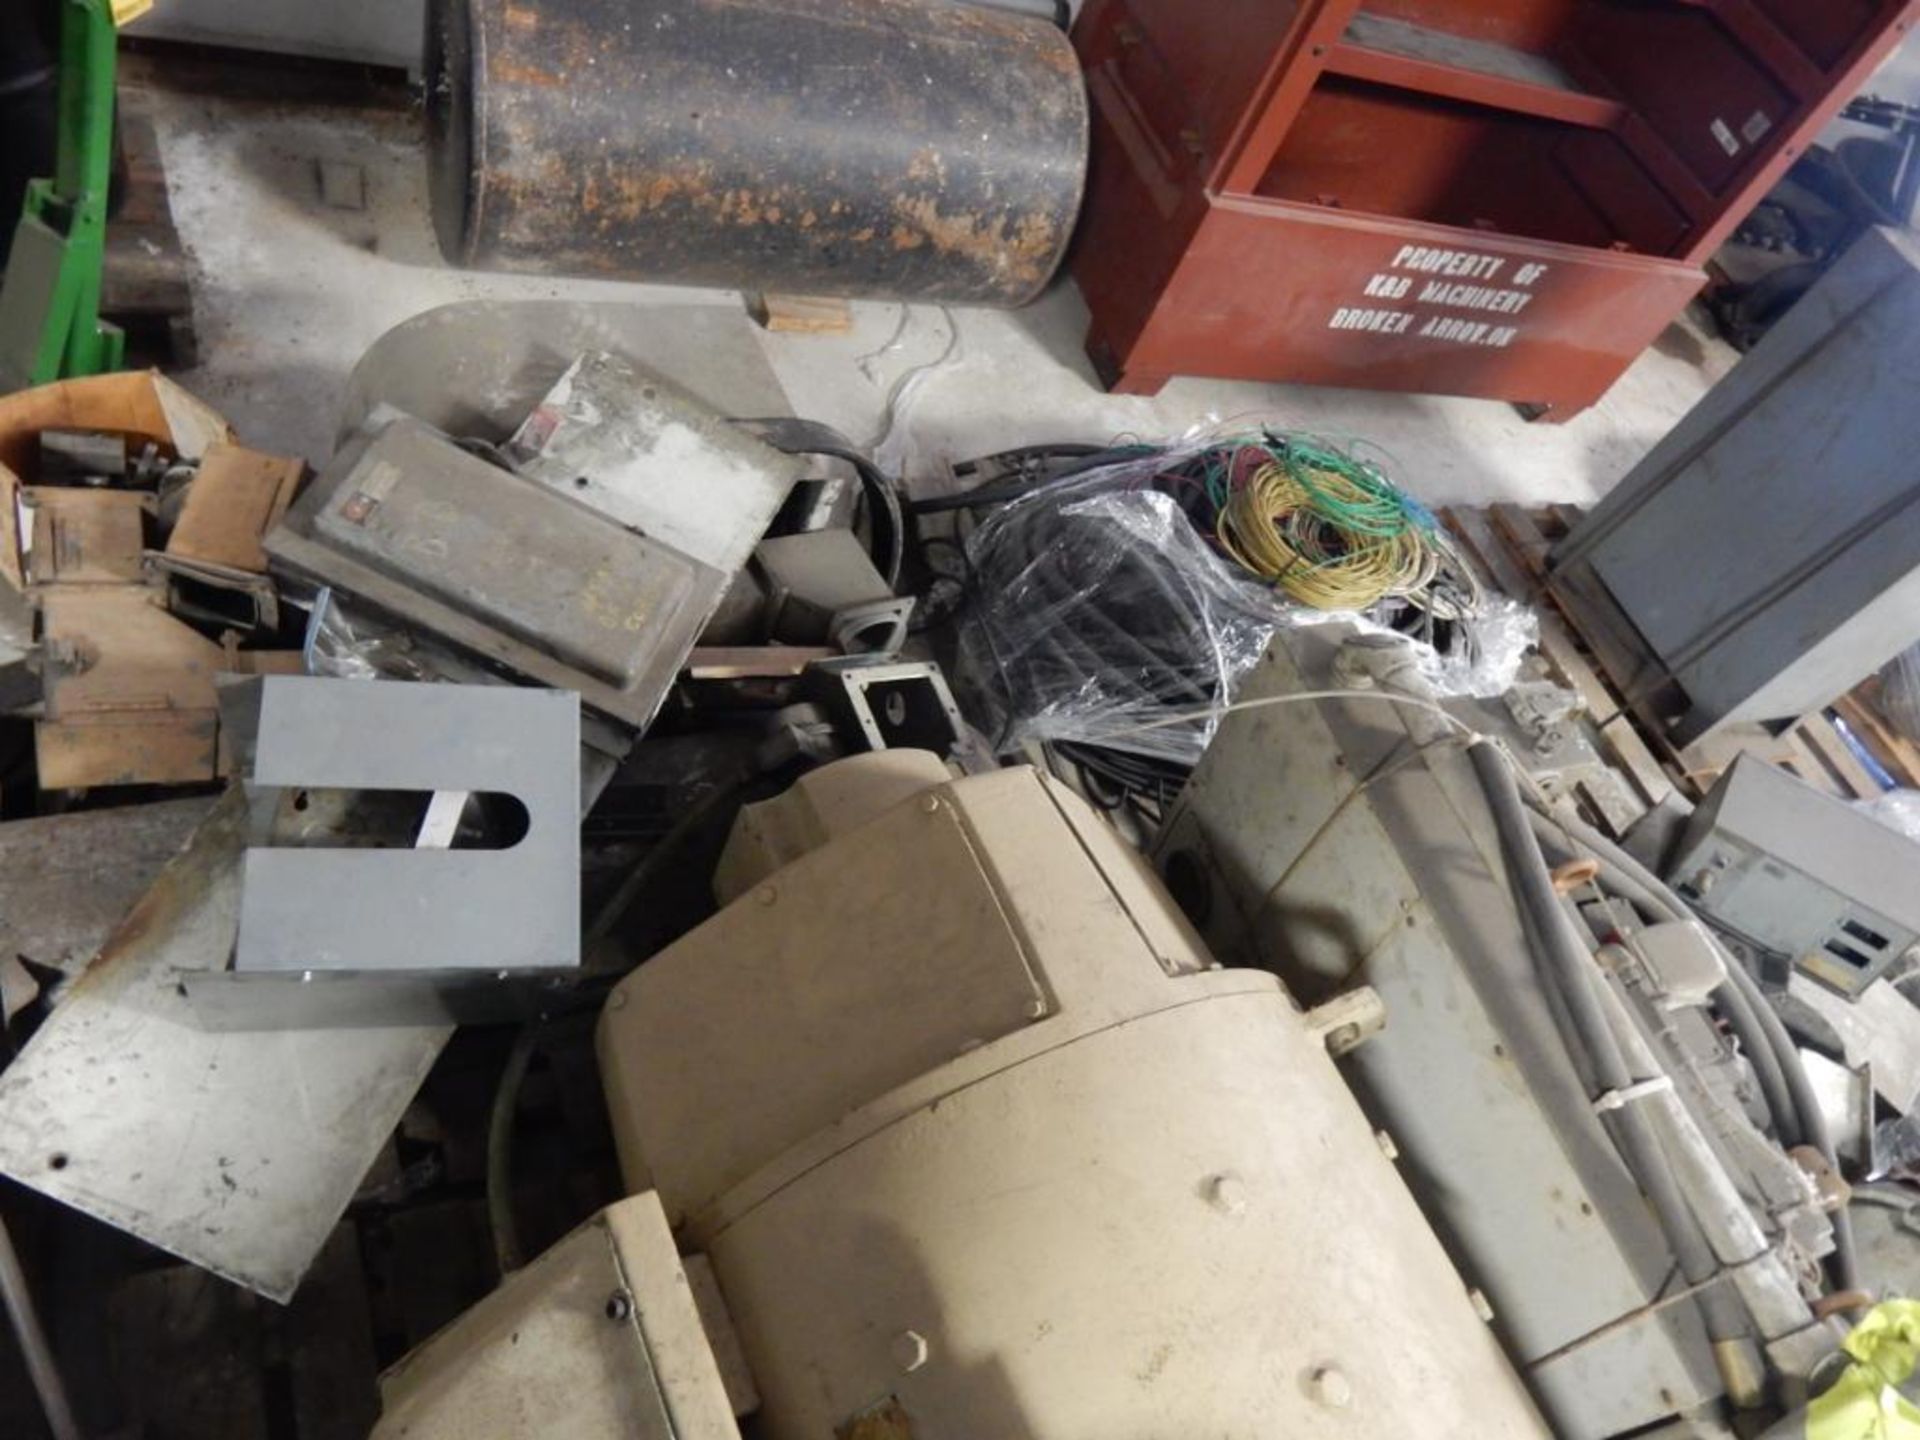 LOT MISC. ELEC. MOTORS, DRIVES, ELECTRICAL BOXES, WIRING, MACHINE PARTS, ETC. - Image 3 of 6